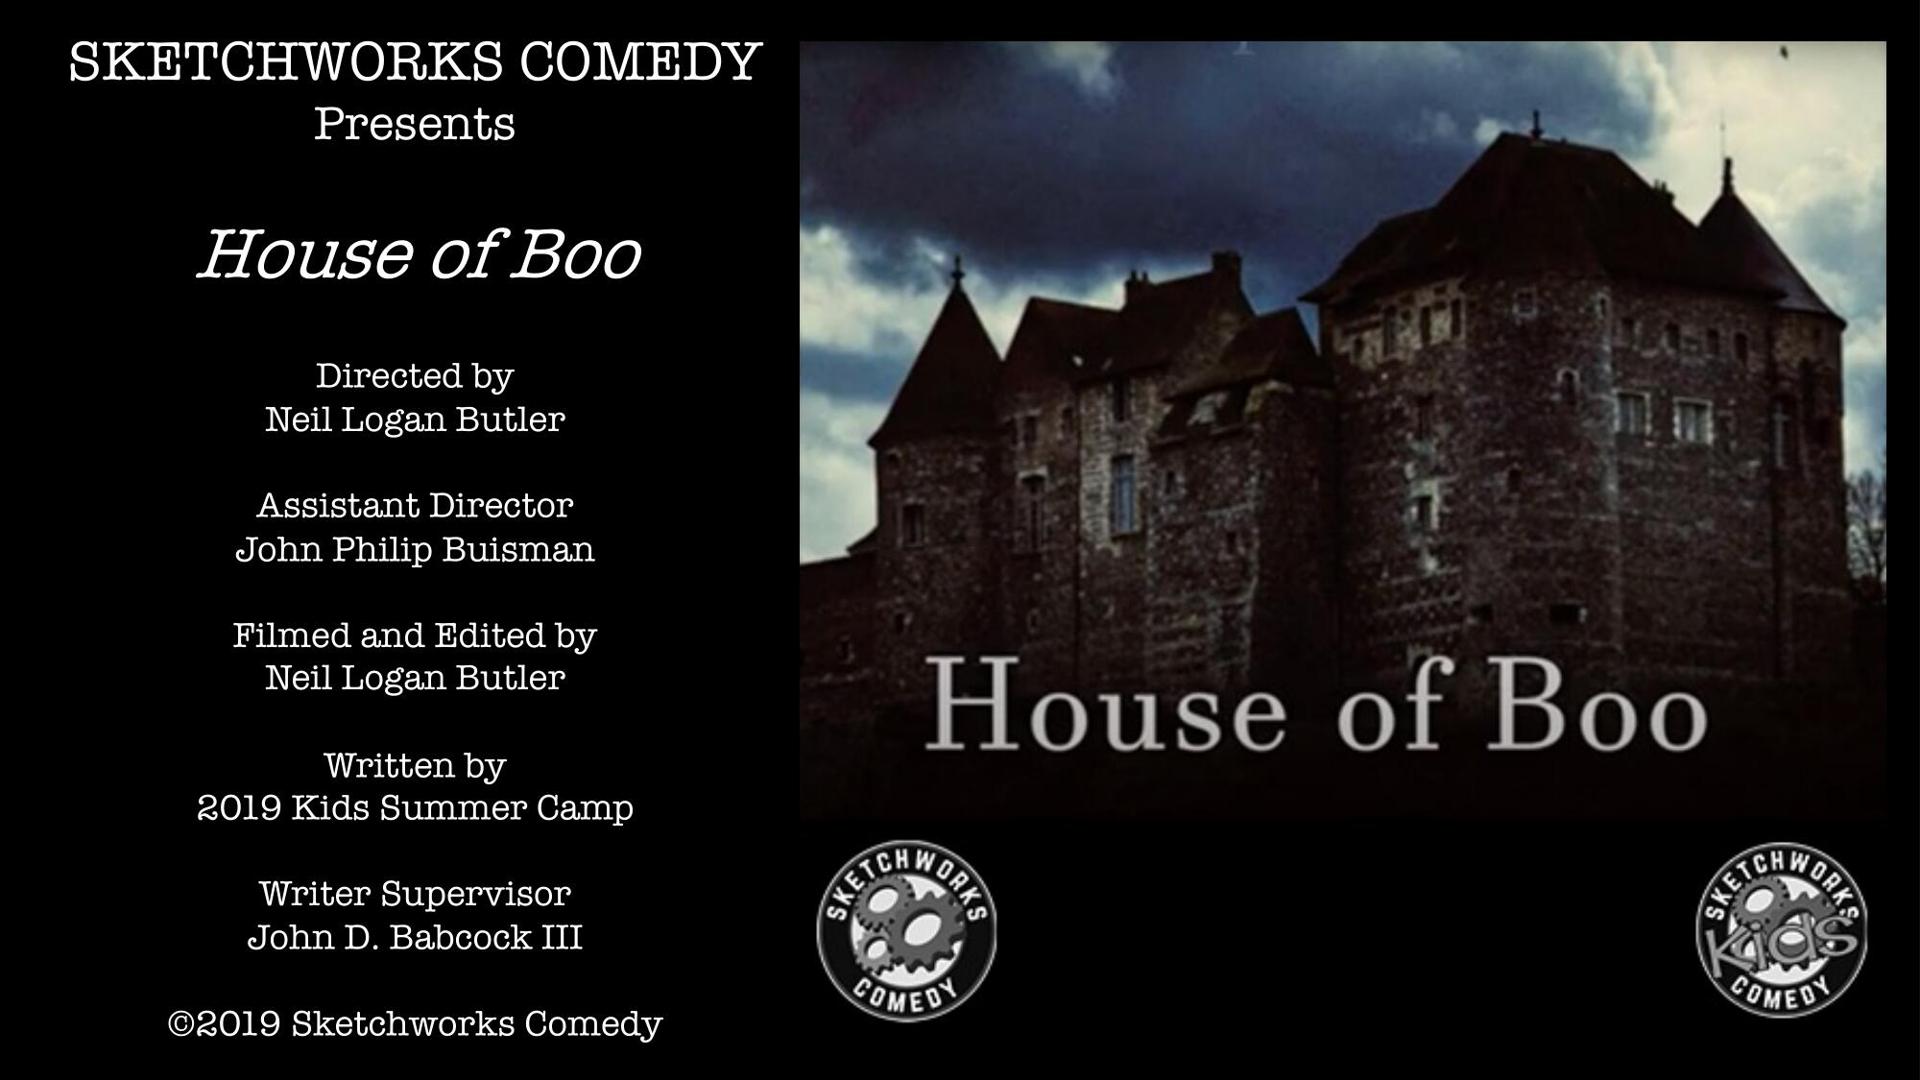 House of Boo